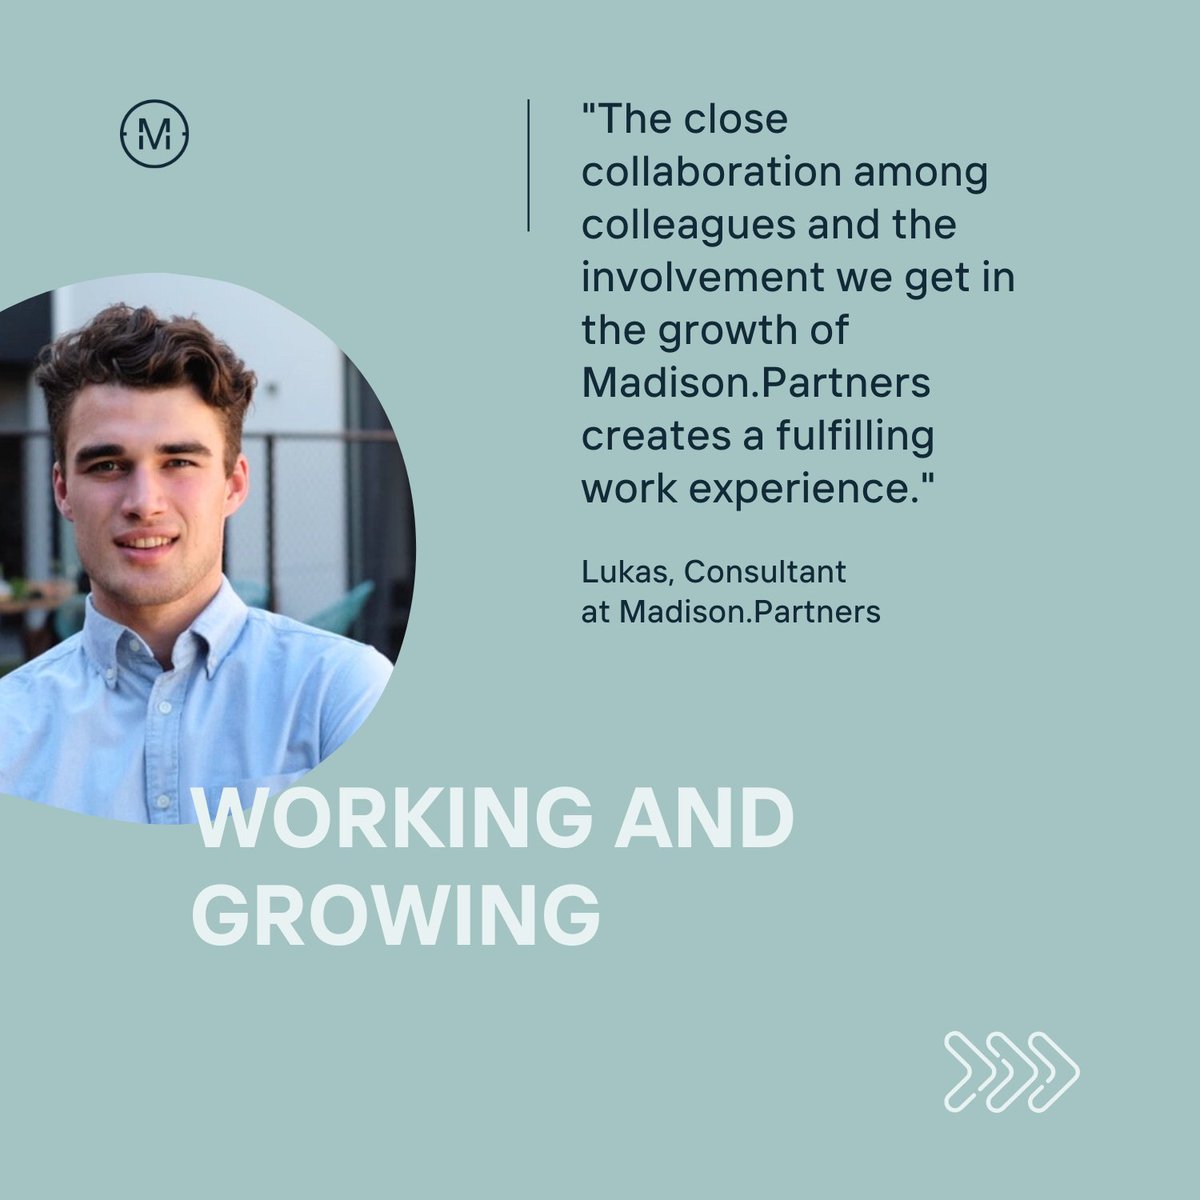 What does a fulfilling workplace entail for you? Let's shape it together! 🤝

Might be a match? Our colleague Lukas will be happy to tell you more about our open position of Data Strategy Consultant: hubs.la/Q02tBYXf0

#dataconsultant #datajob #WorkingatMadisonPartners